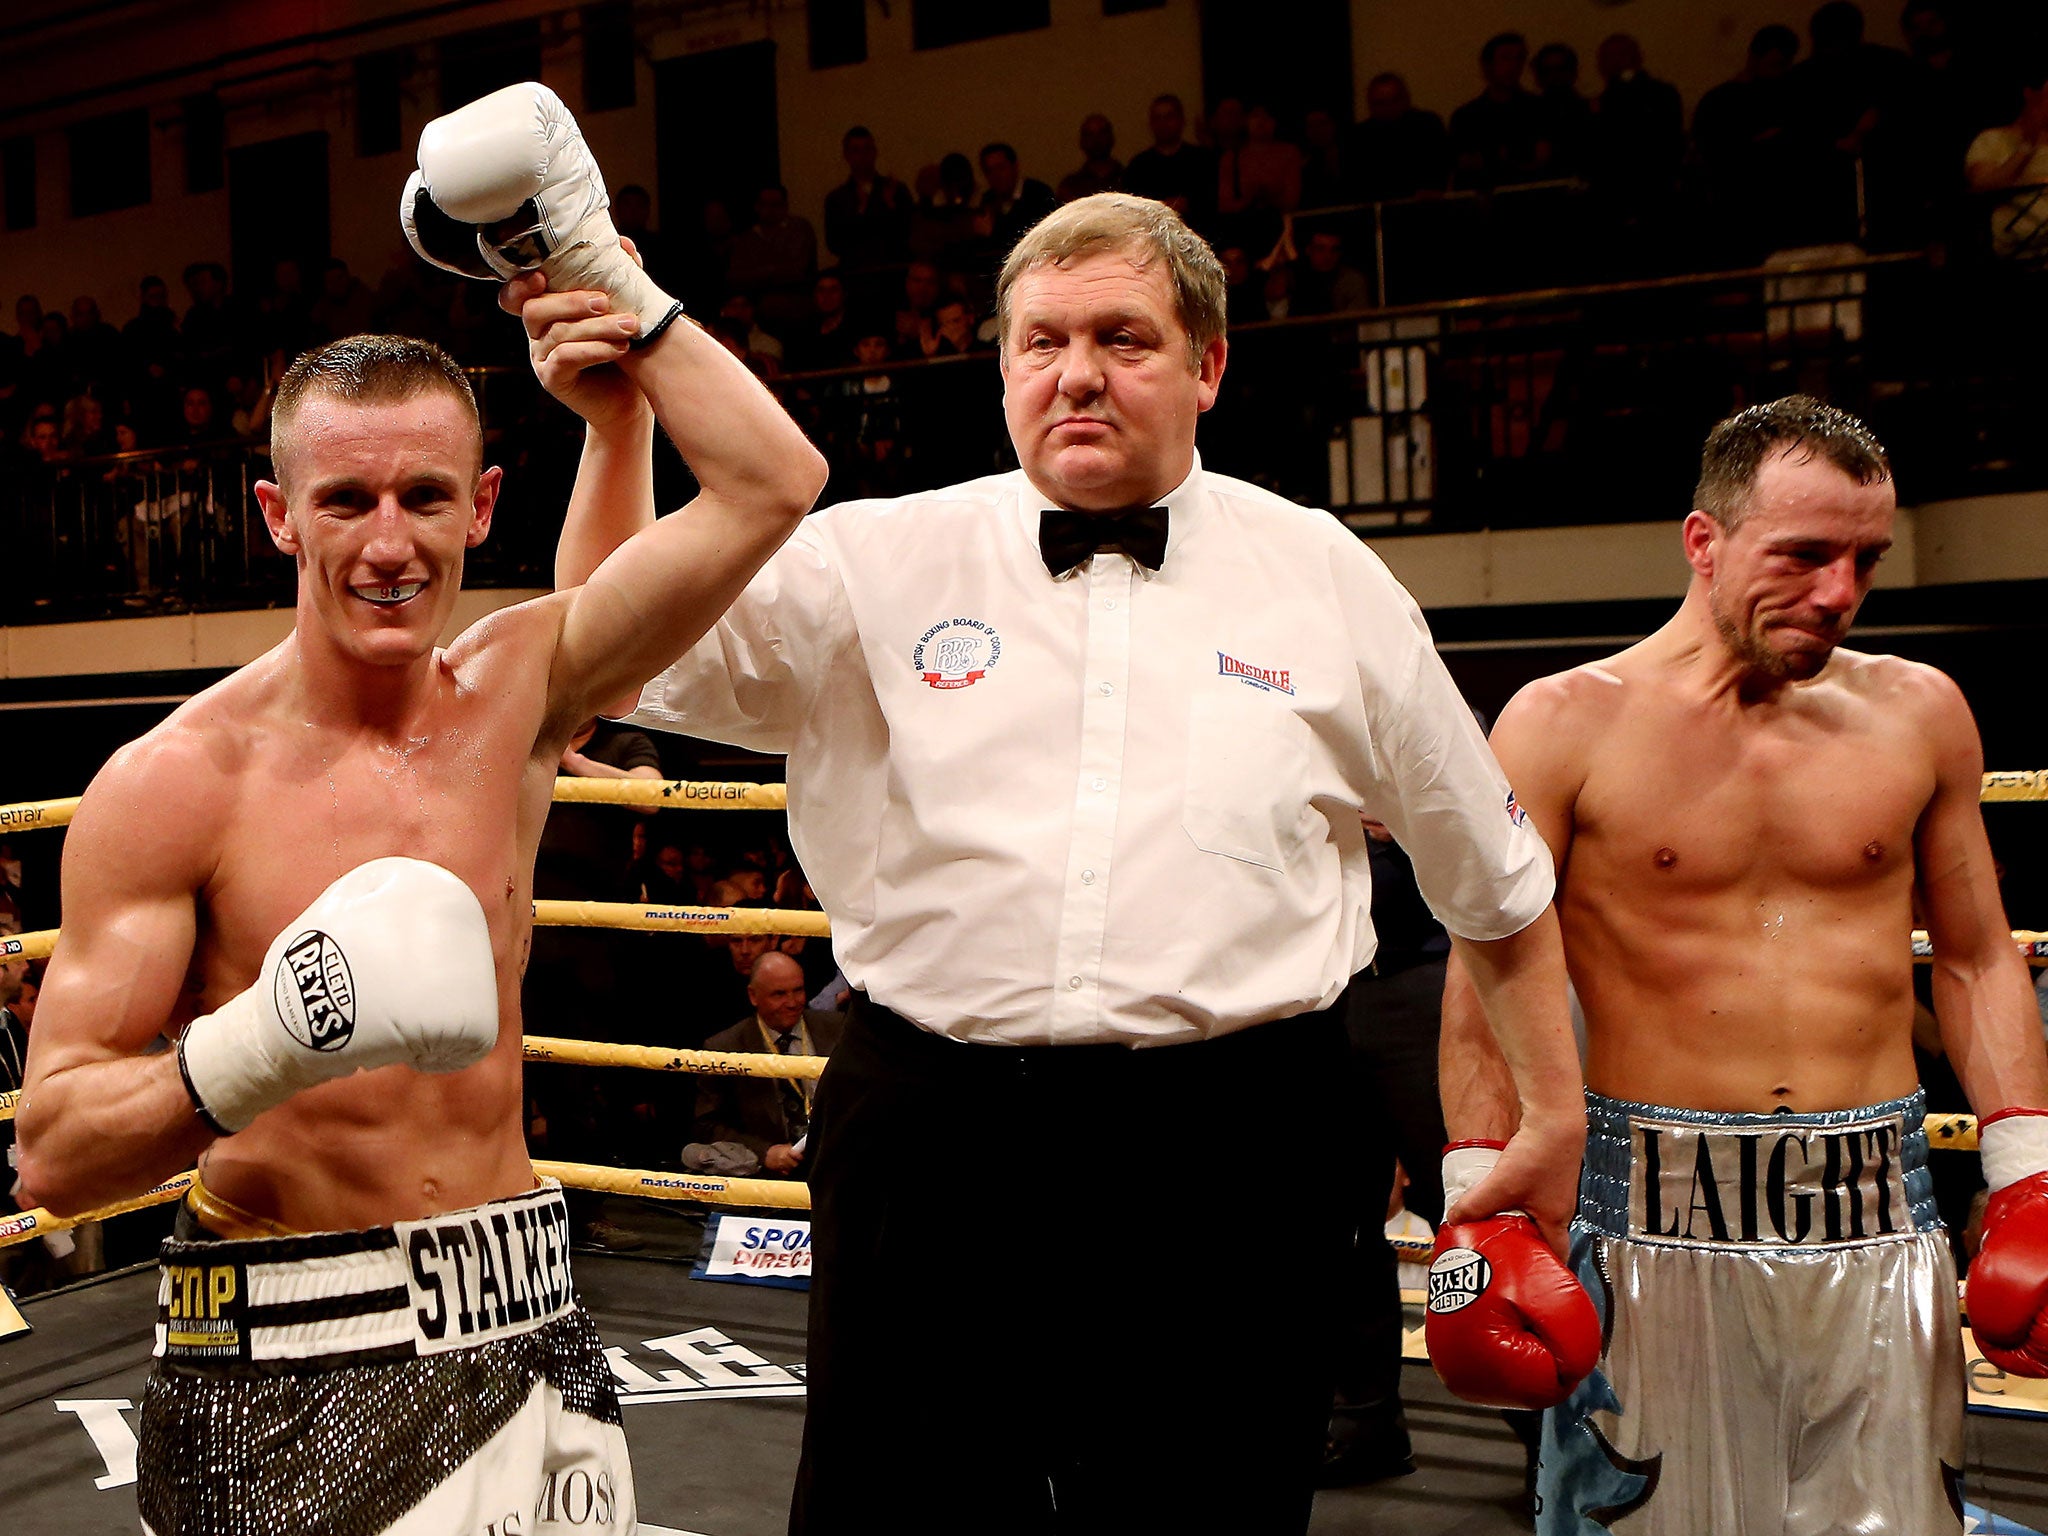 Kristian Laight (right) after one of his 185 defeats from 201 fights